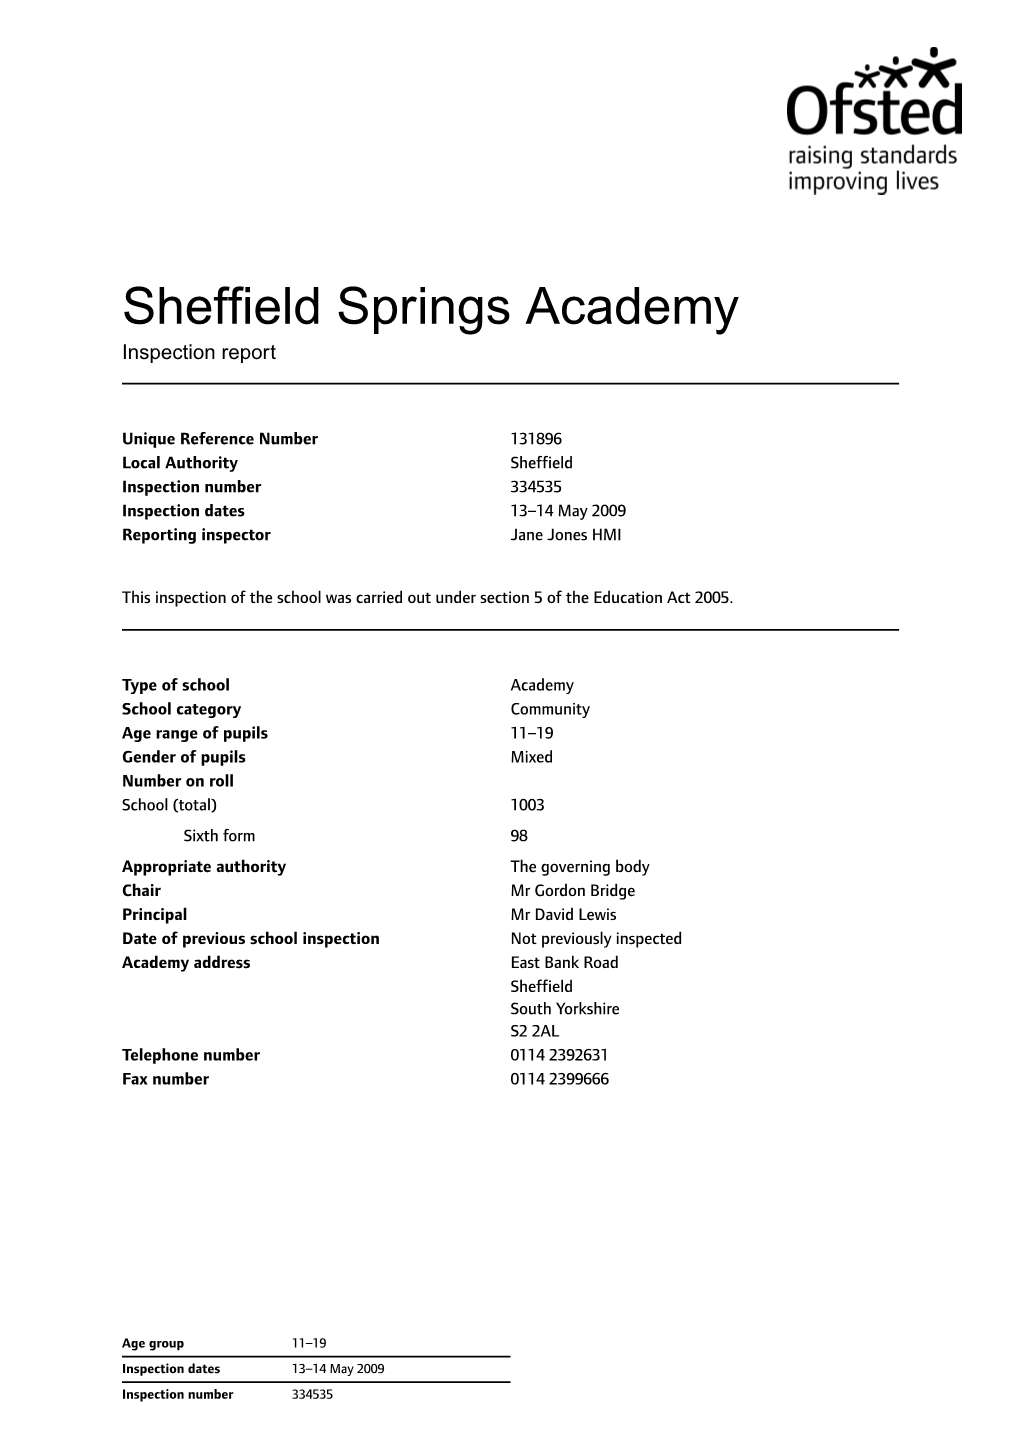 Sheffield Springs Academy Inspection Report